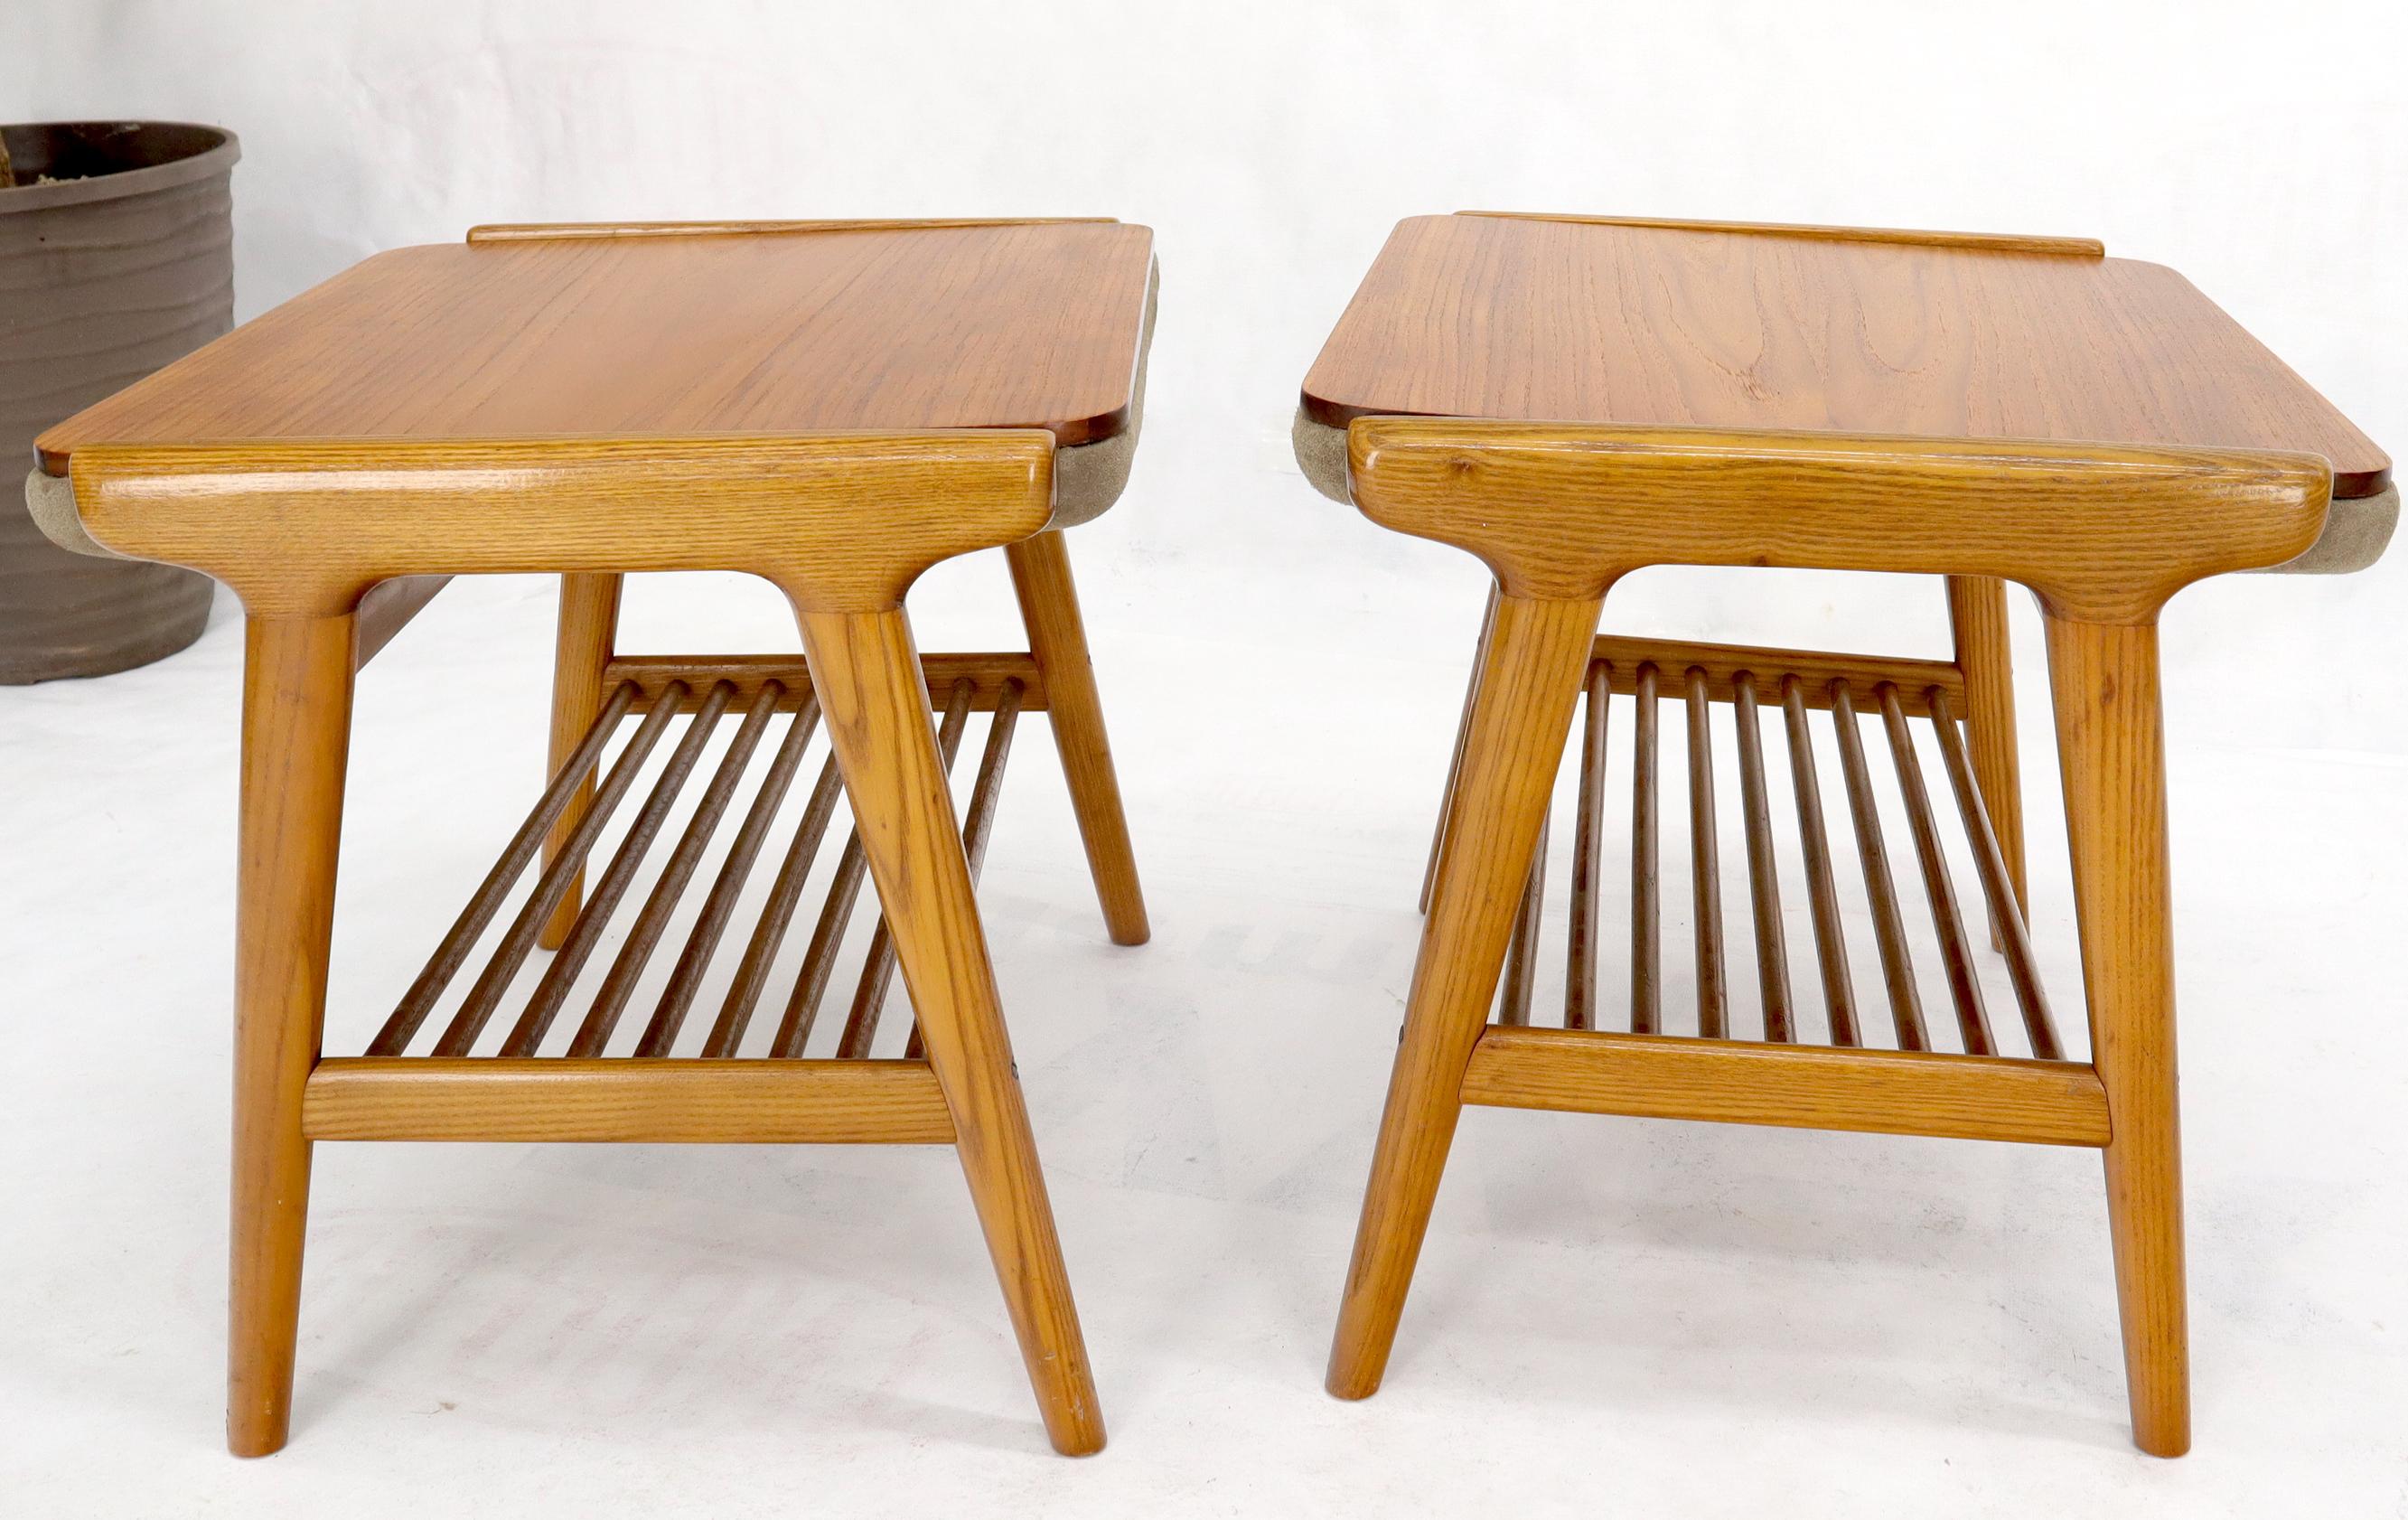 Pair of Danish Teak Mid-Century Modern Flip Top Tables Suede Benches For Sale 4